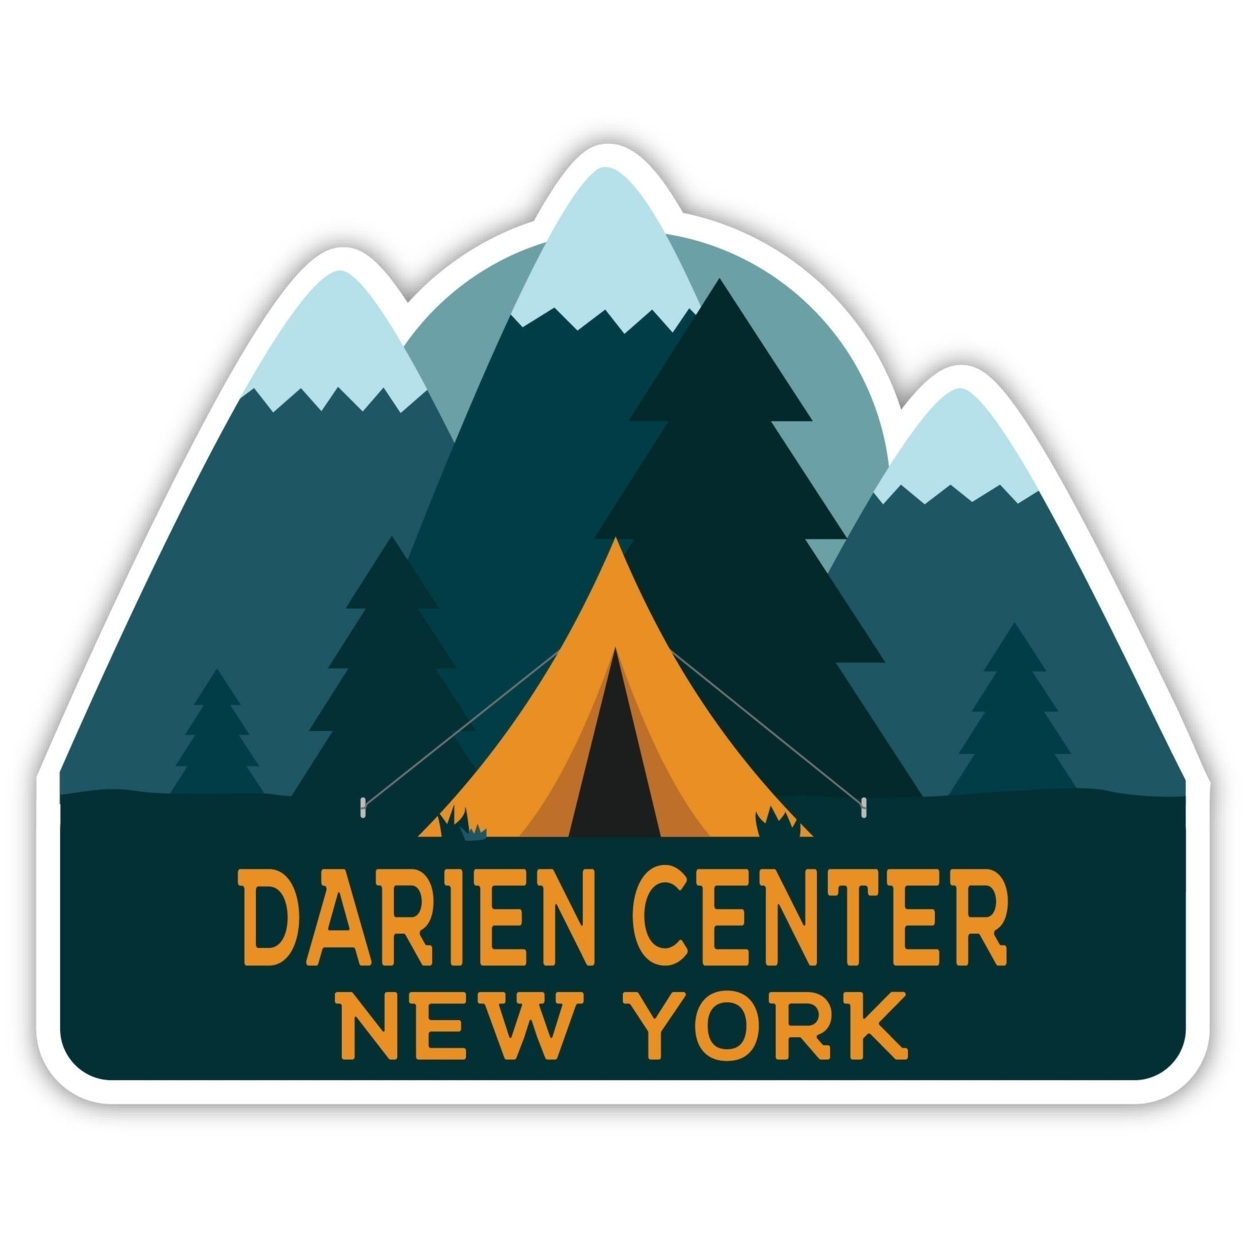 Darien Center New York Souvenir Decorative Stickers (Choose Theme And Size) - 4-Pack, 4-Inch, Bear